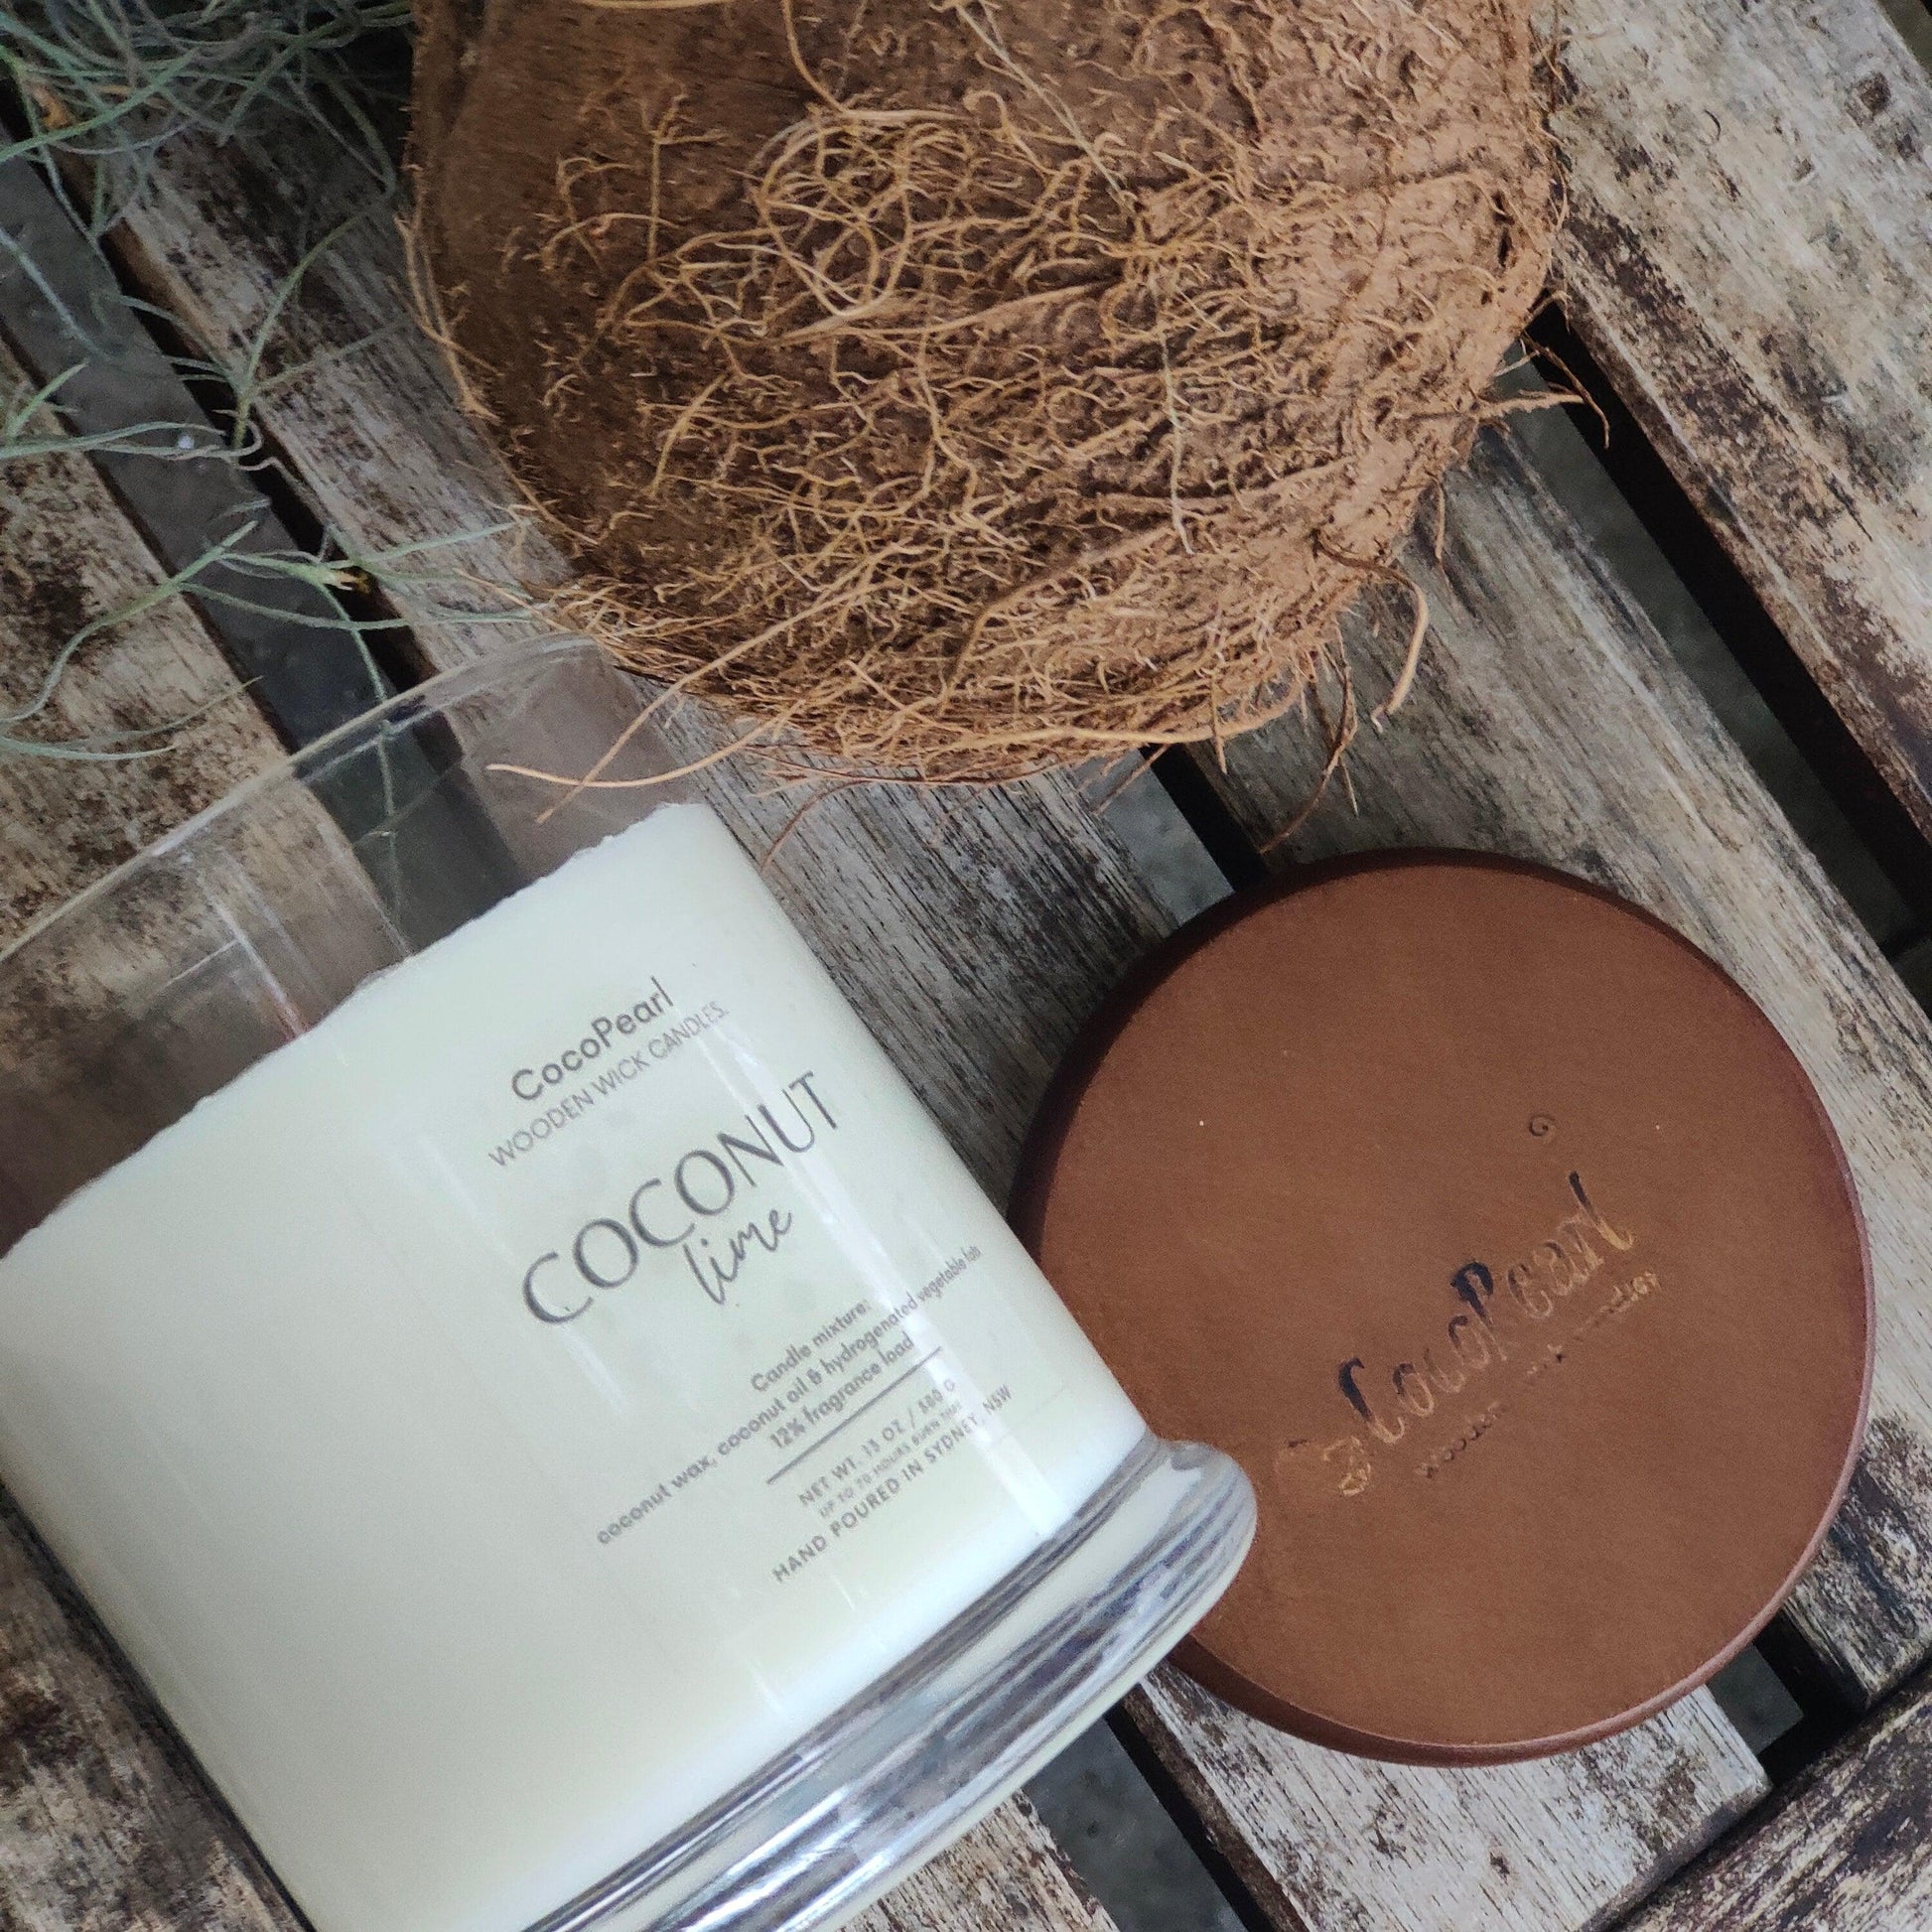 Coconut & Lime | Wooden wick - CocoPearl Candles